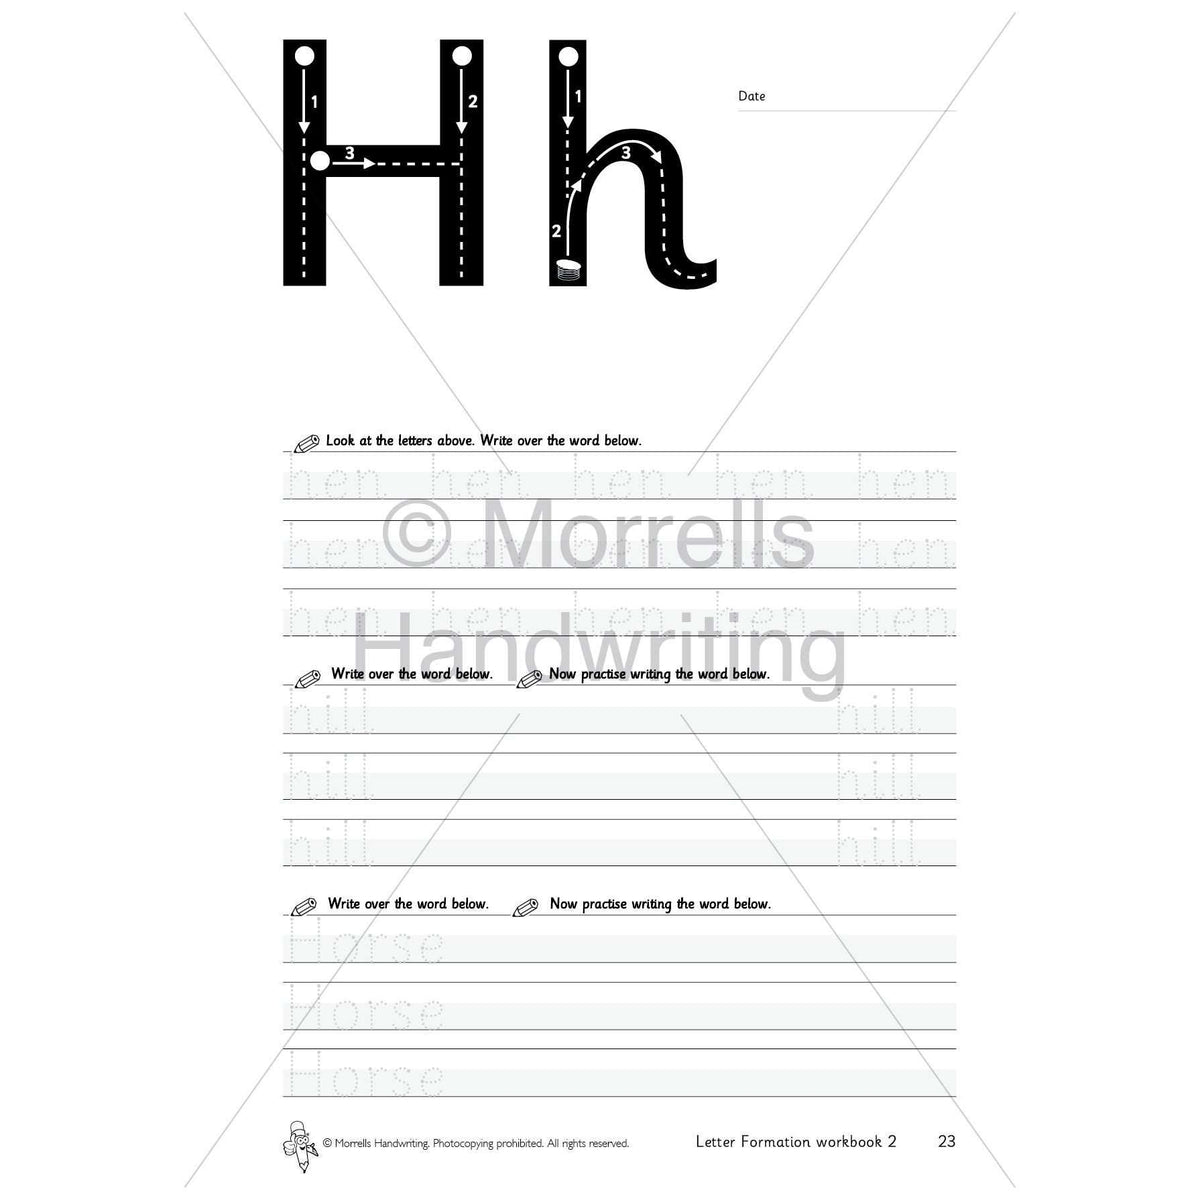 morrells-handwriting-letter-formation-workbook-2-primary-classroom